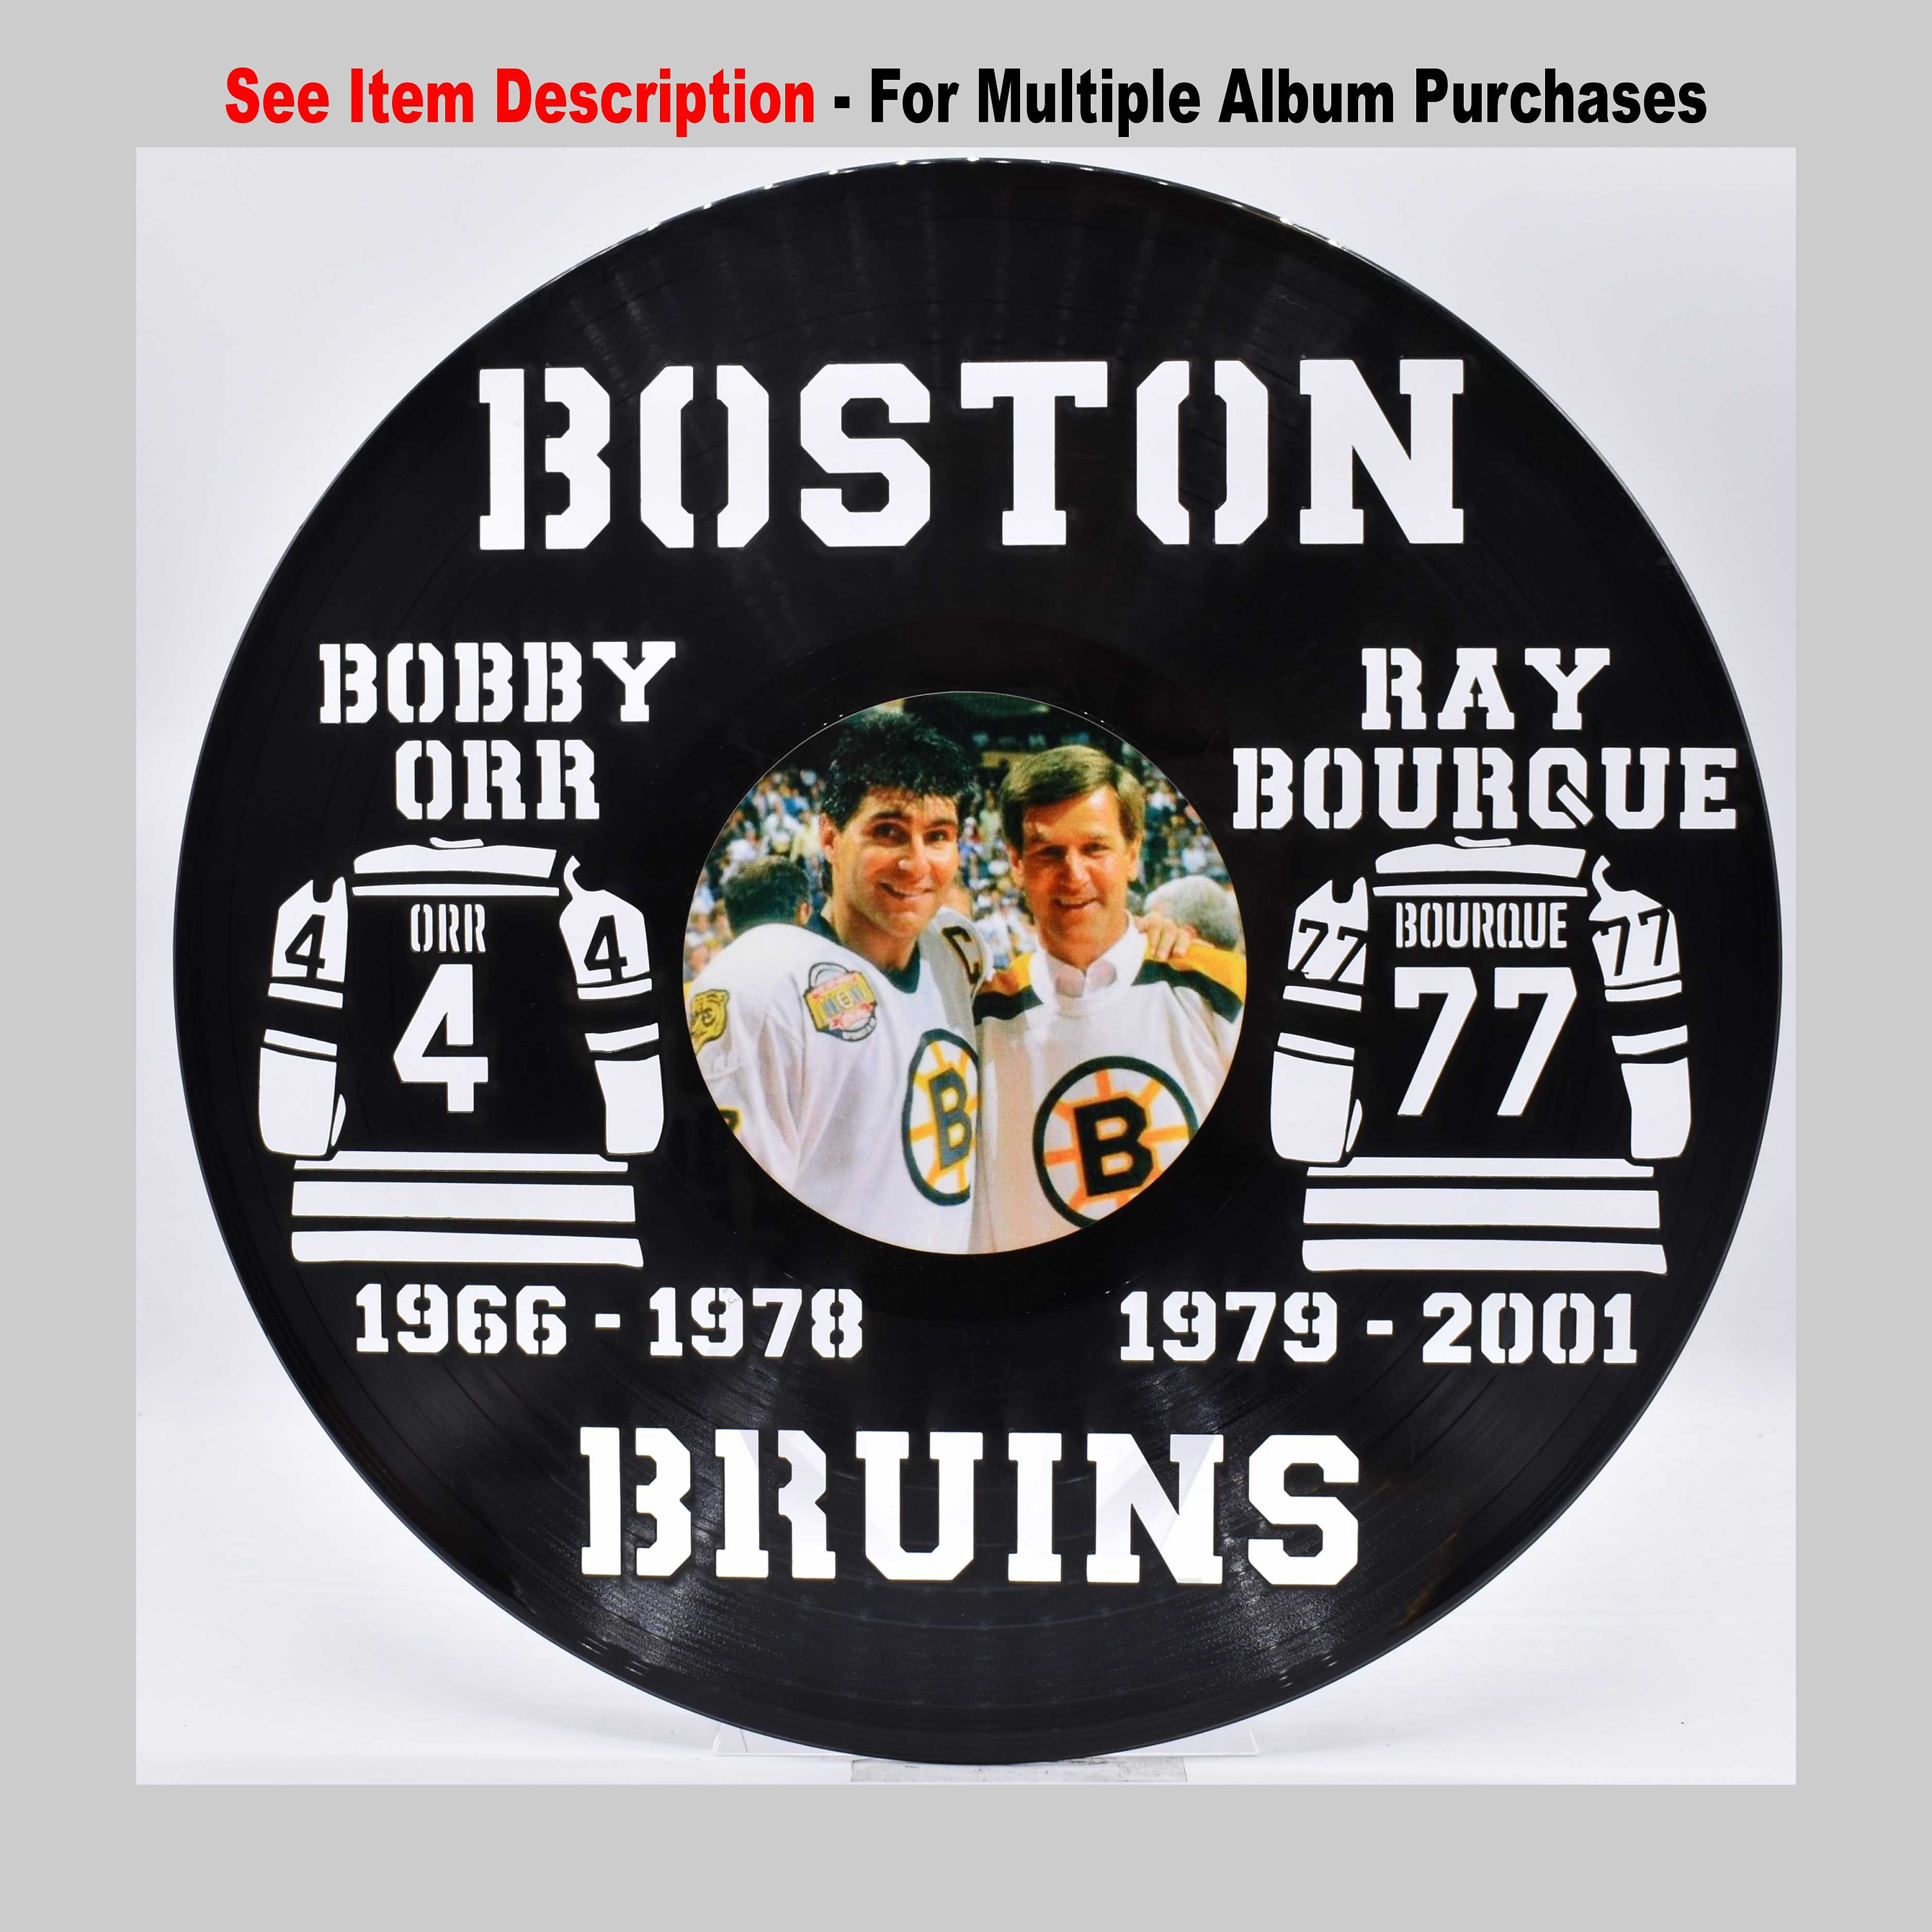 Boston Bruins Ray Bourque Retired Number Ceremony